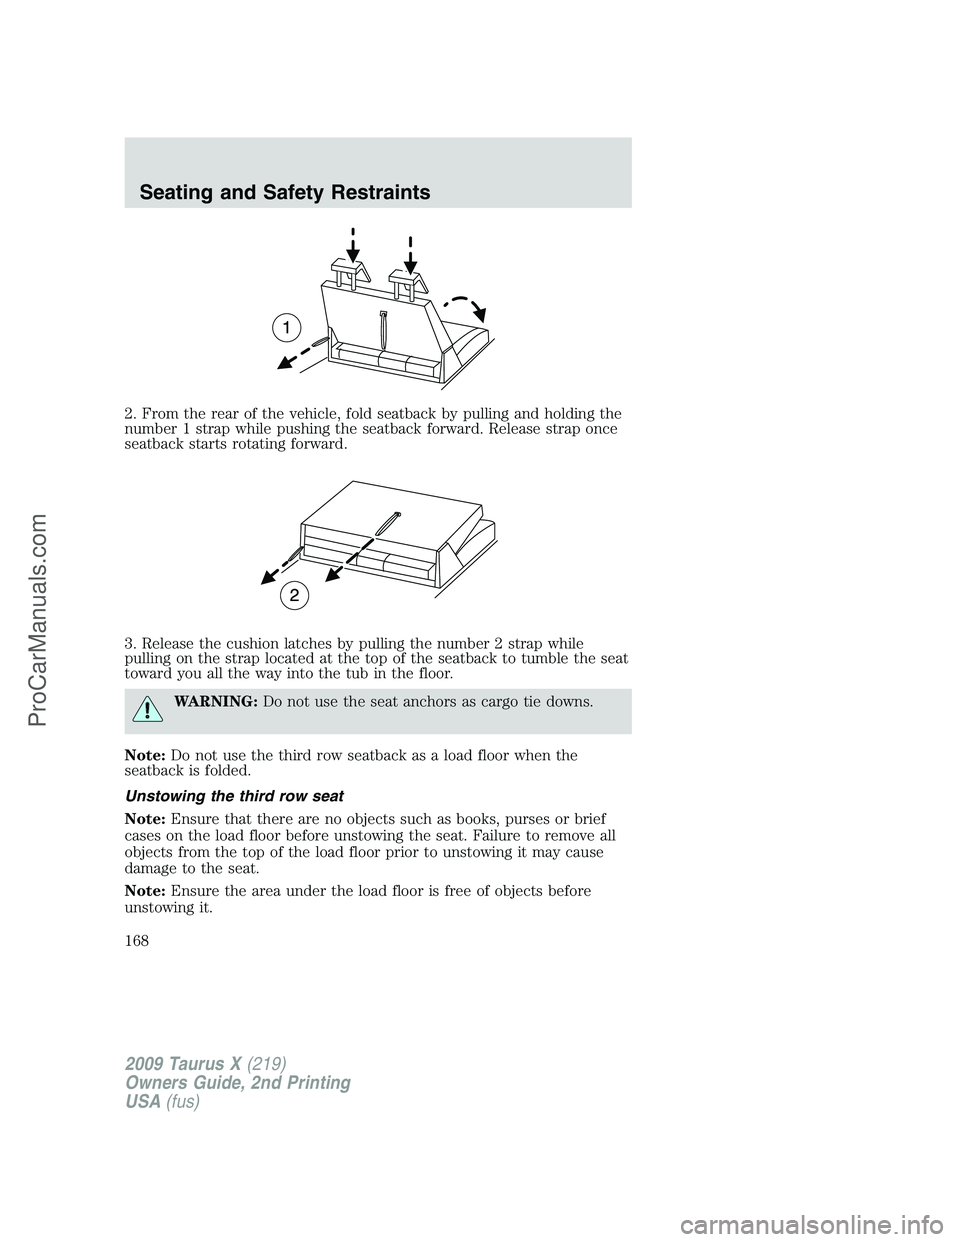 FORD FREESTYLE 2009  Owners Manual 2. From the rear of the vehicle, fold seatback by pulling and holding the
number 1 strap while pushing the seatback forward. Release strap once
seatback starts rotating forward.
3. Release the cushion